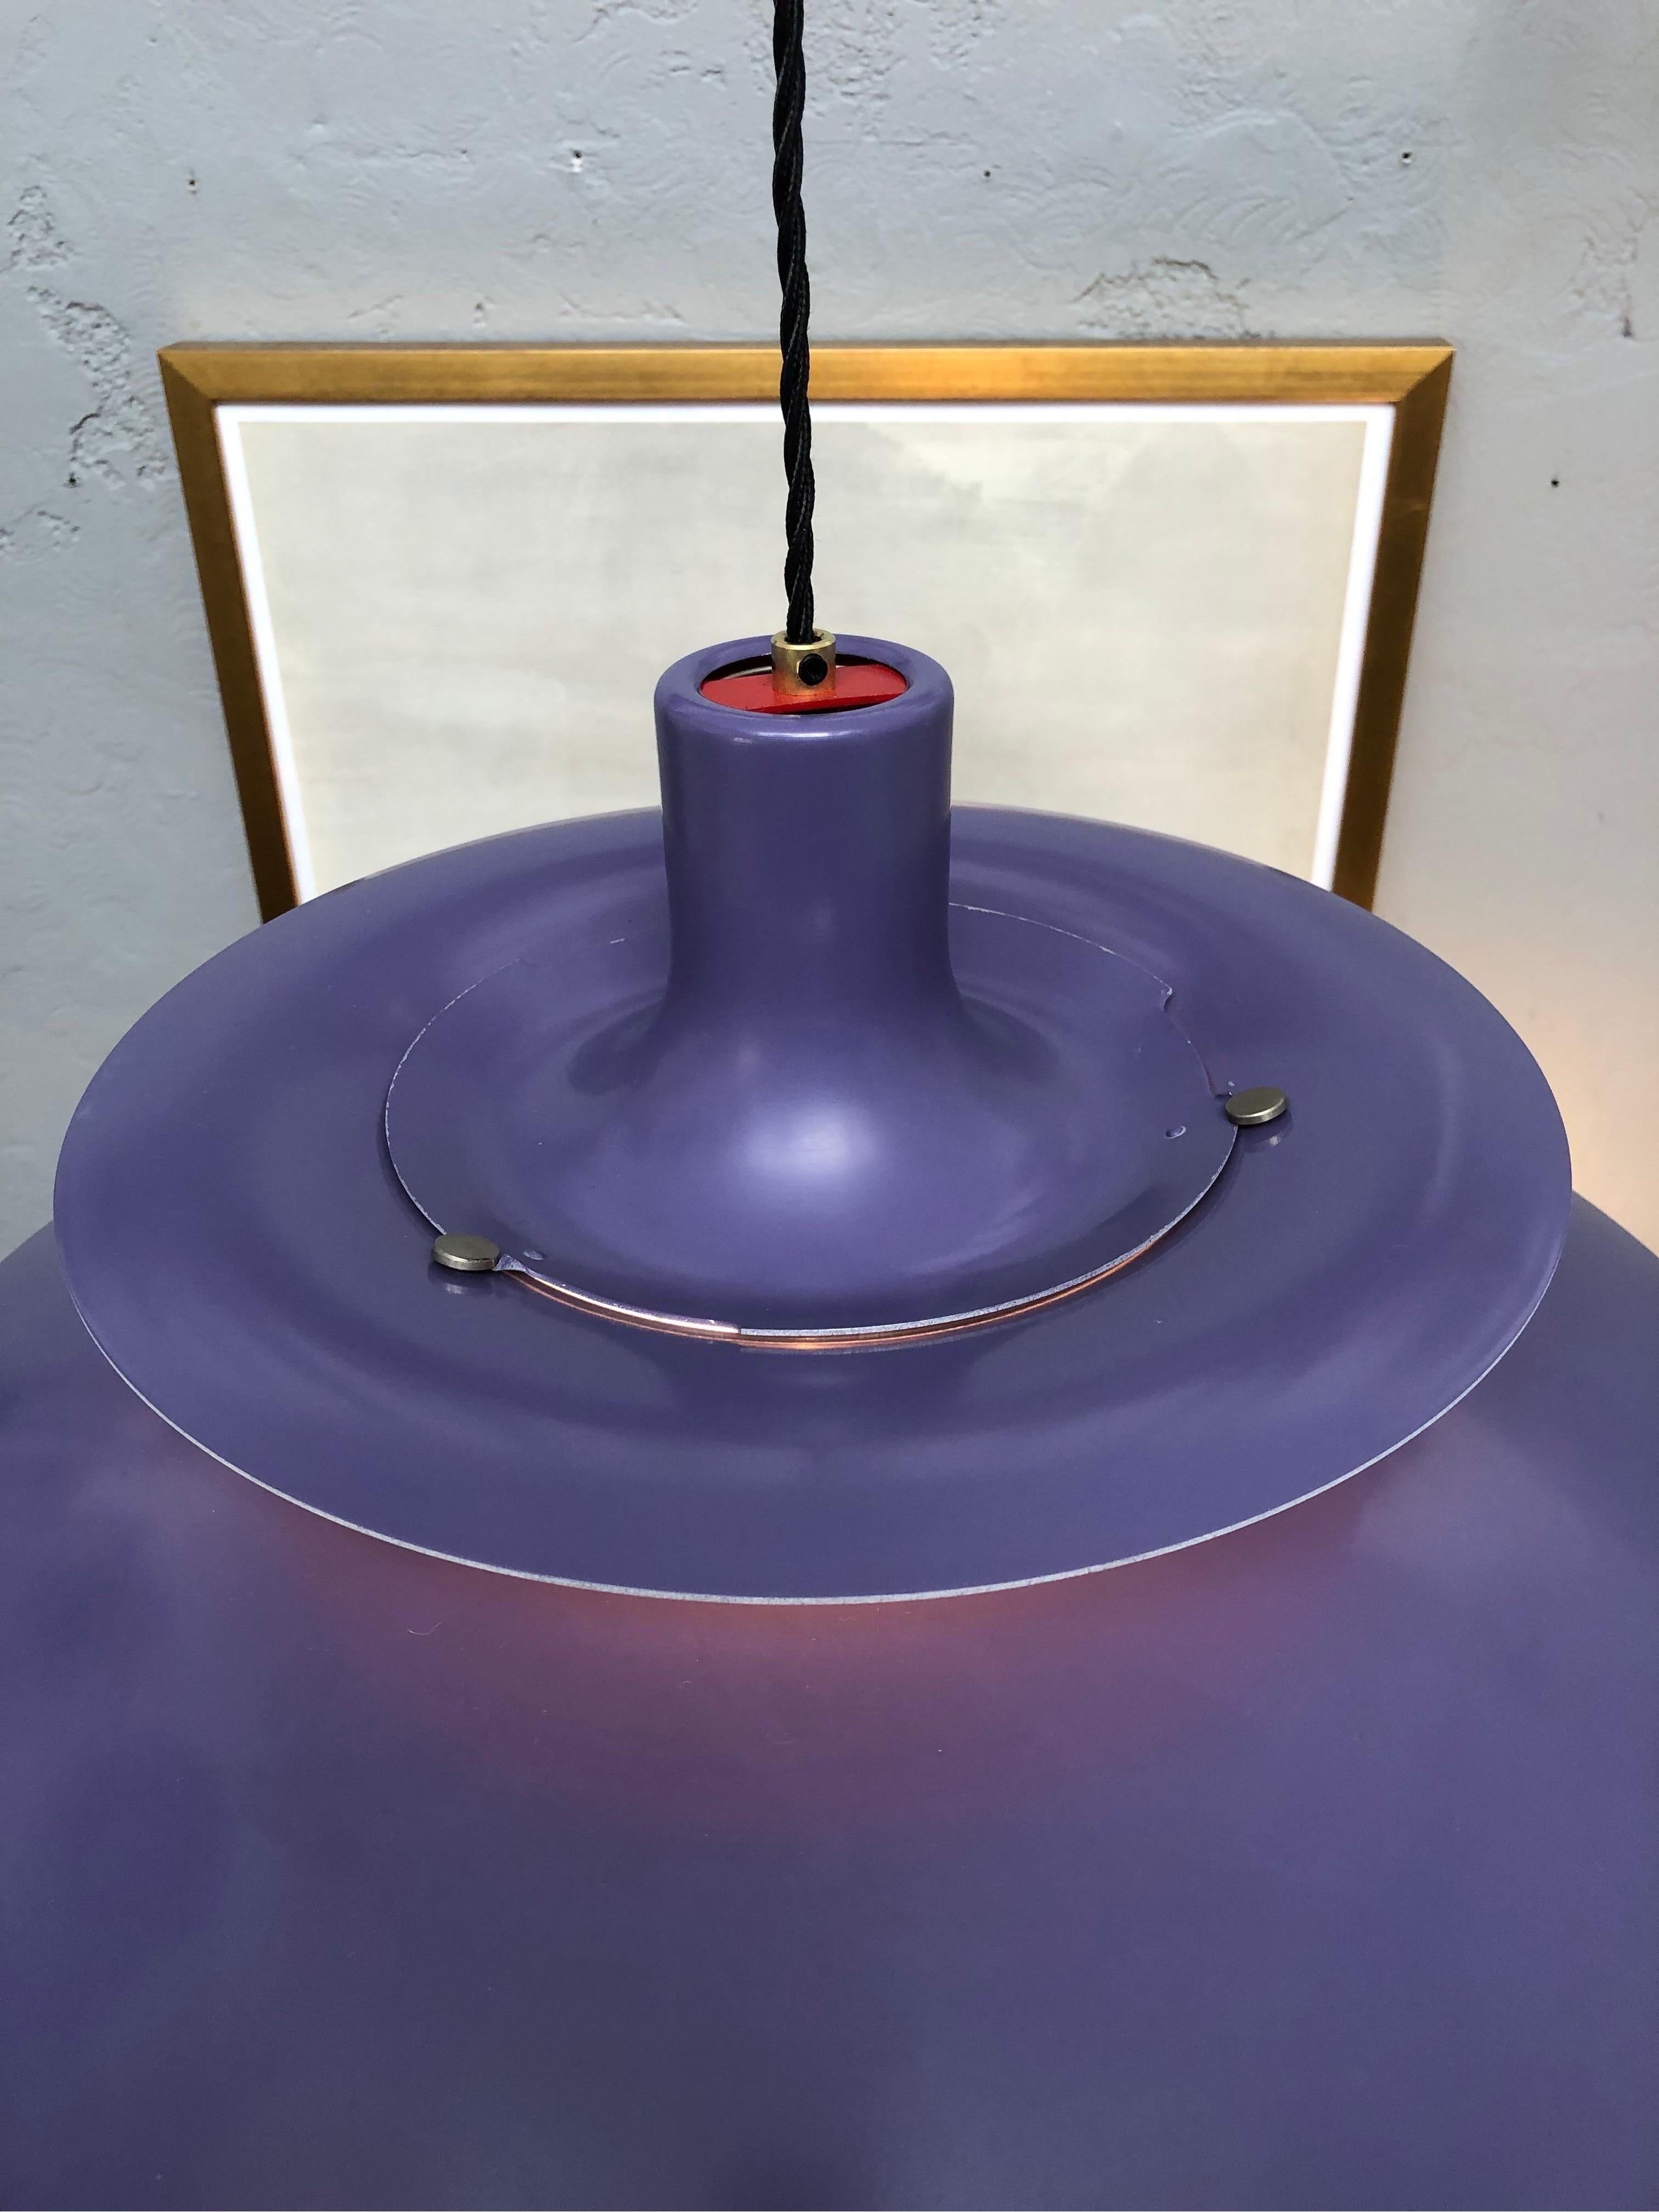 Mid-20th Century Iconic Rare 1st Edition Poul Henningsen PH 5 Chandelier Pendant Lamp from 1958